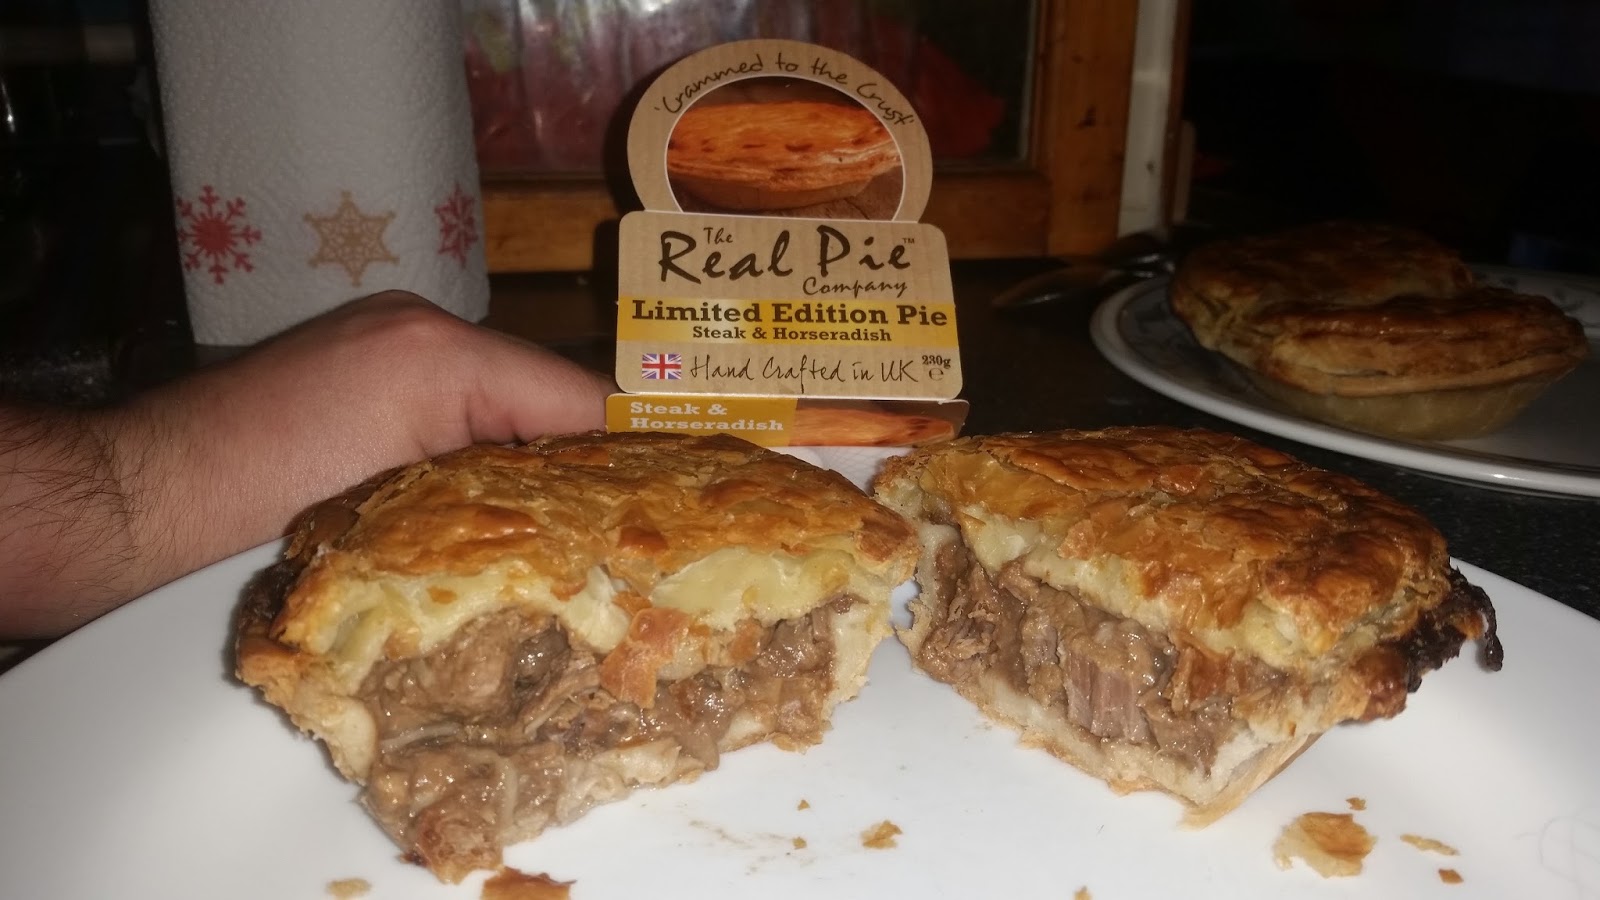 Pierate - Pie Reviews: I real-ly can't fault these pie much!